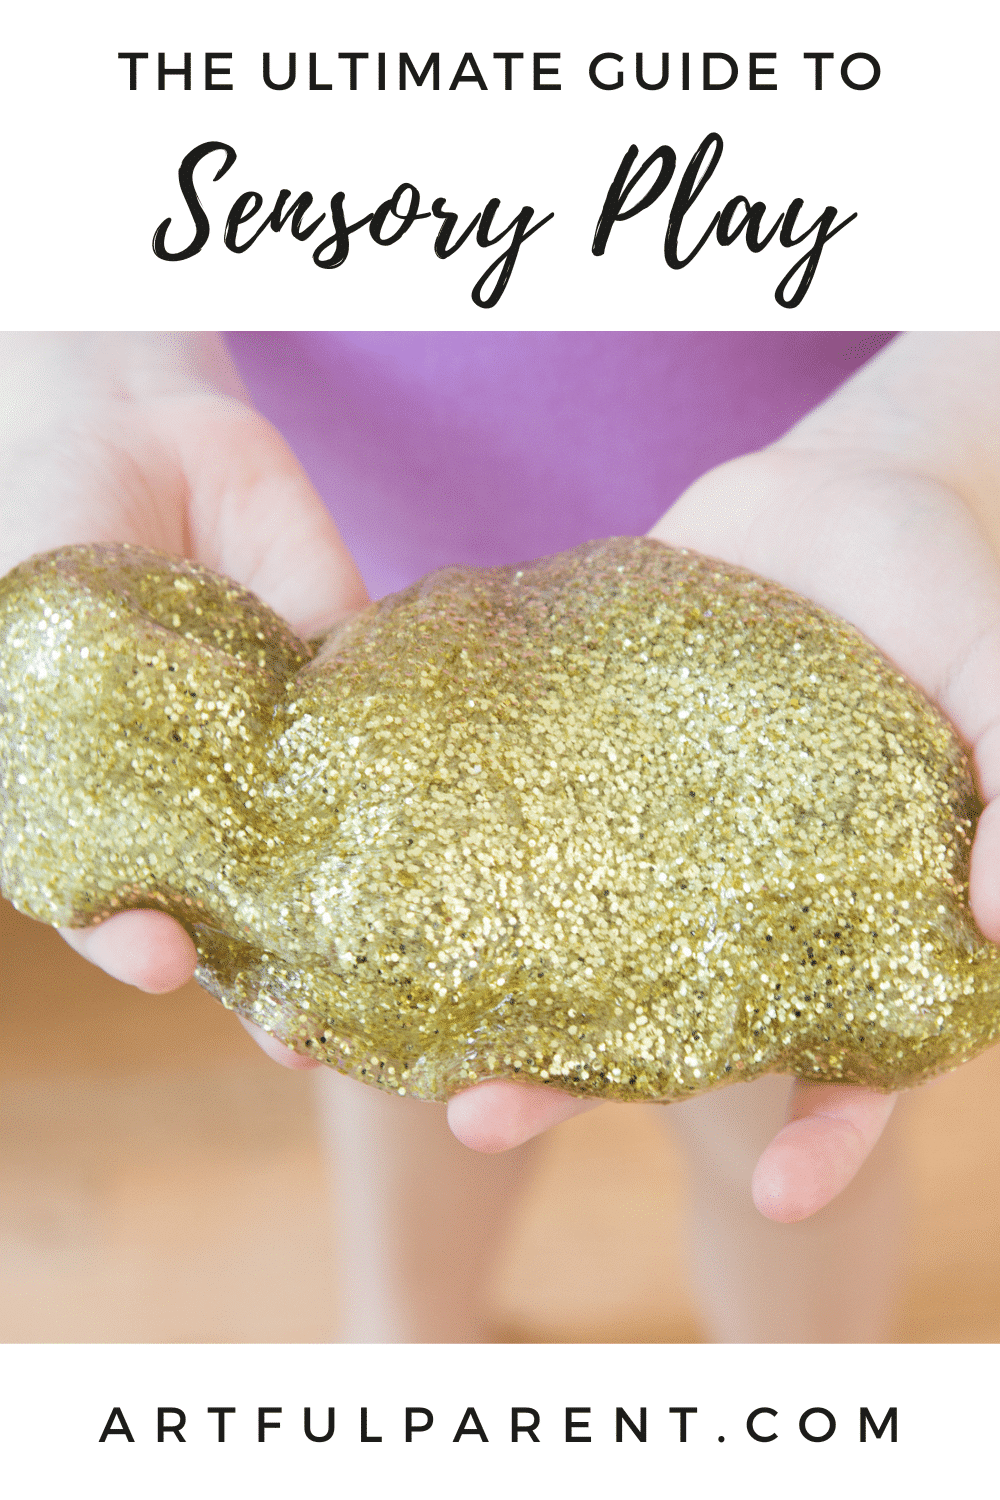 The Ultimate Guide to Sensory Play